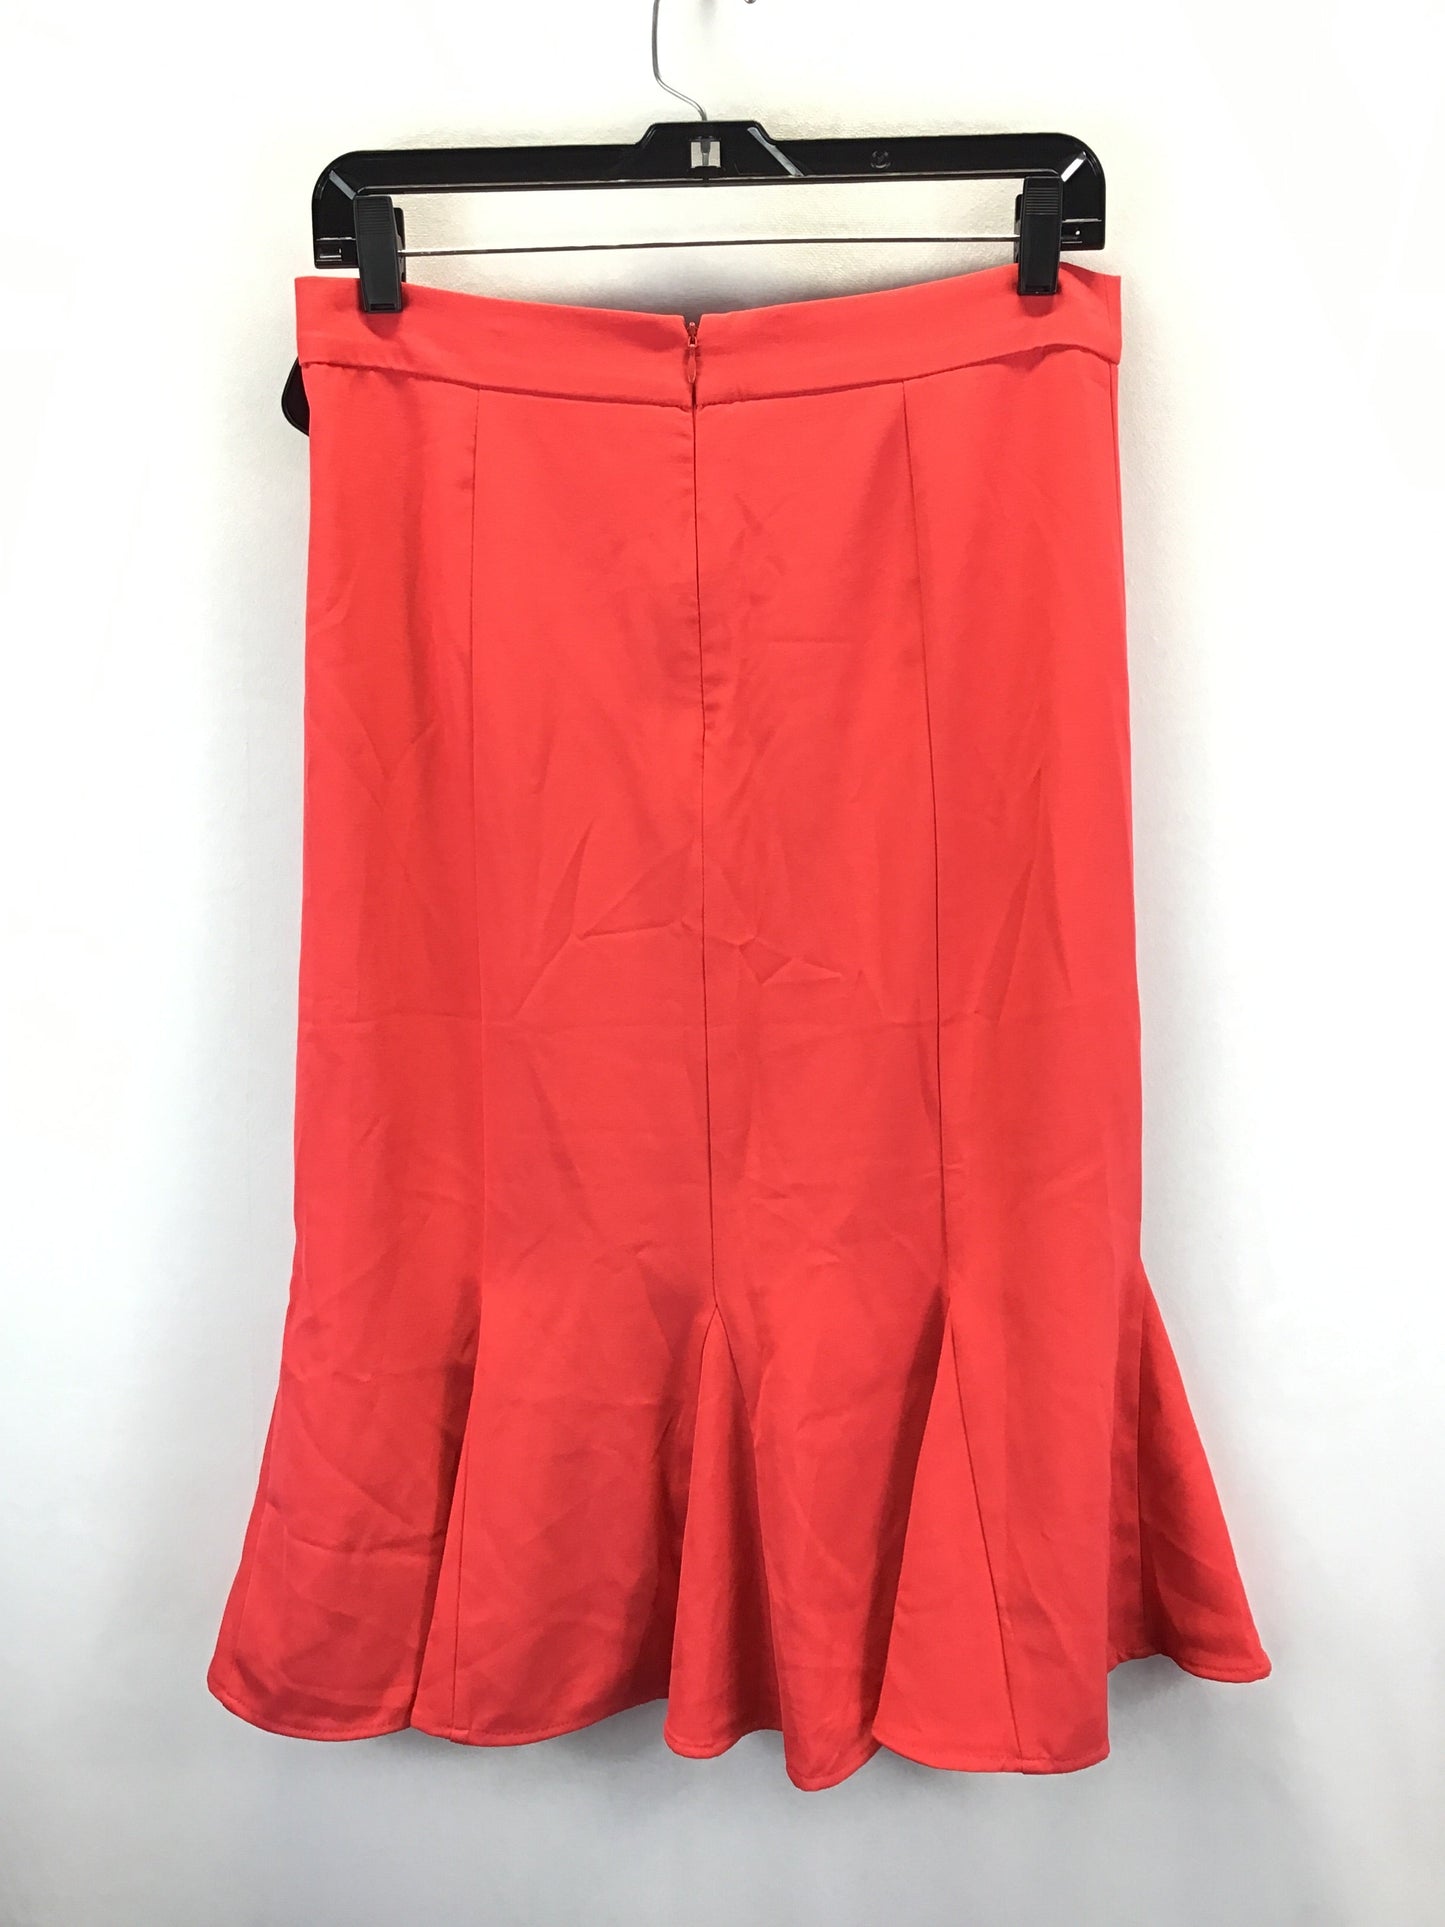 Red Skirt Midi New York And Co, Size 6